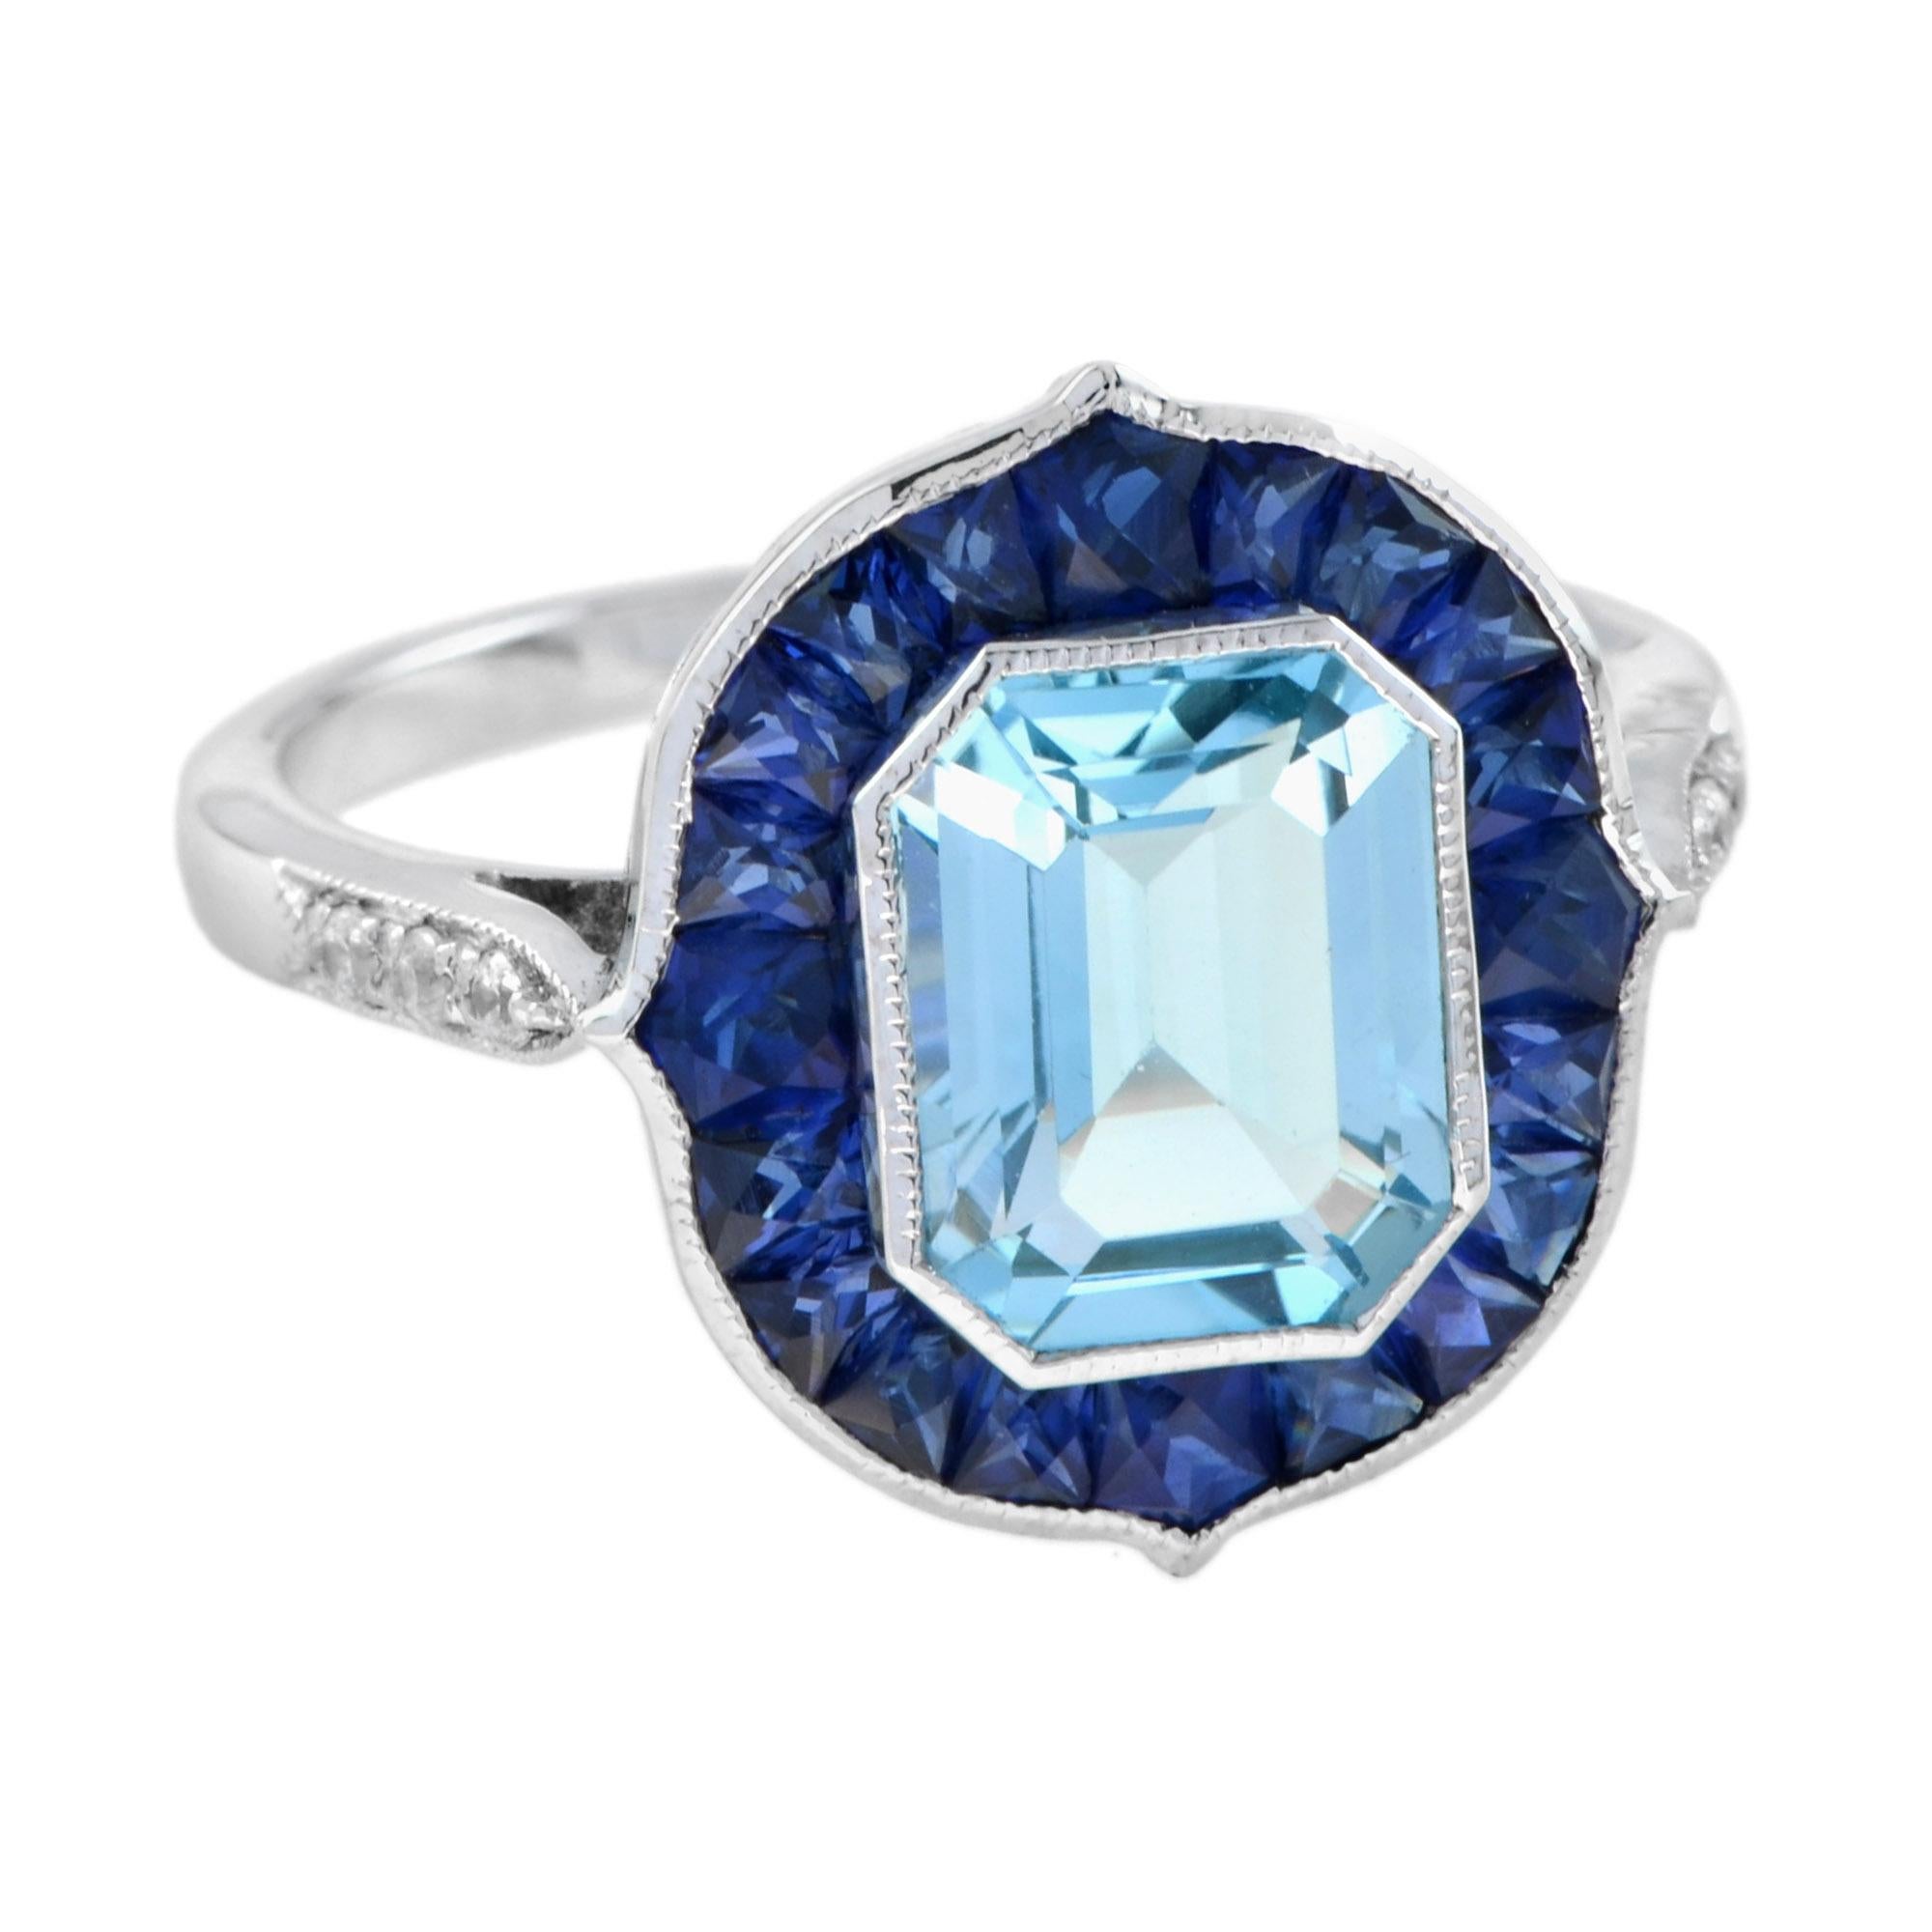 This creation is exquisite. At the heart of this ring is a stunning emerald cut blue topaz, framed by the most delicate milgrain textures. The center blue topaz is accented by French cut blue sapphires. This is a perfect piece for an engagement or a